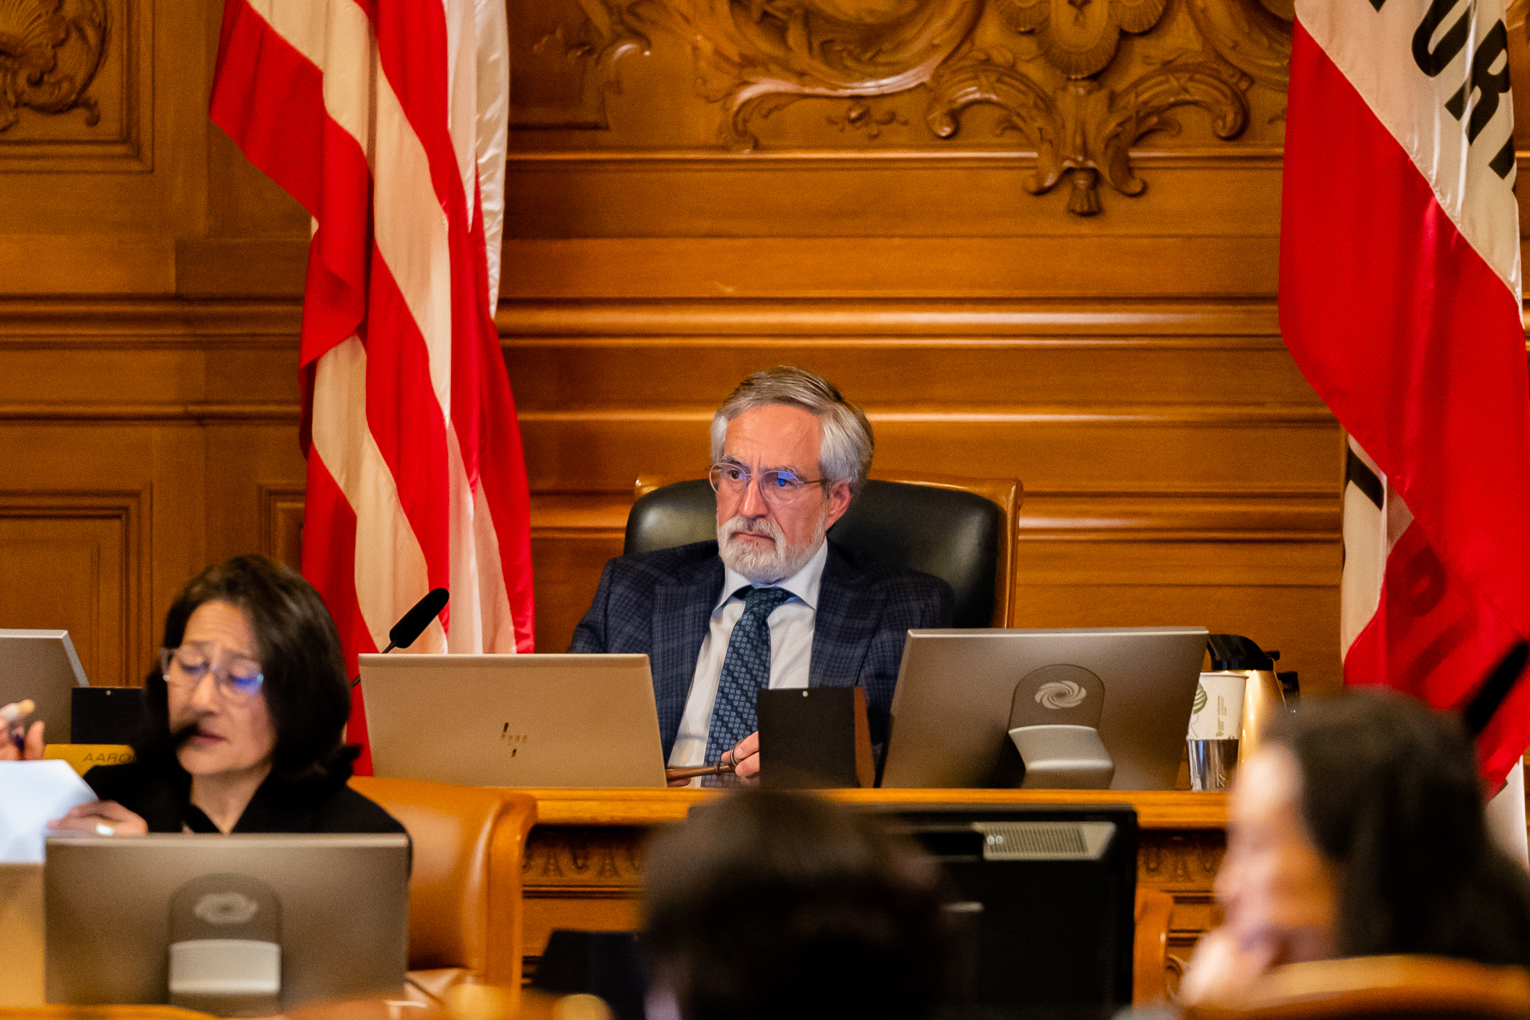 An older man with glasses and a beard sits at a desk, flanked by an American flag and a person working on a laptop.